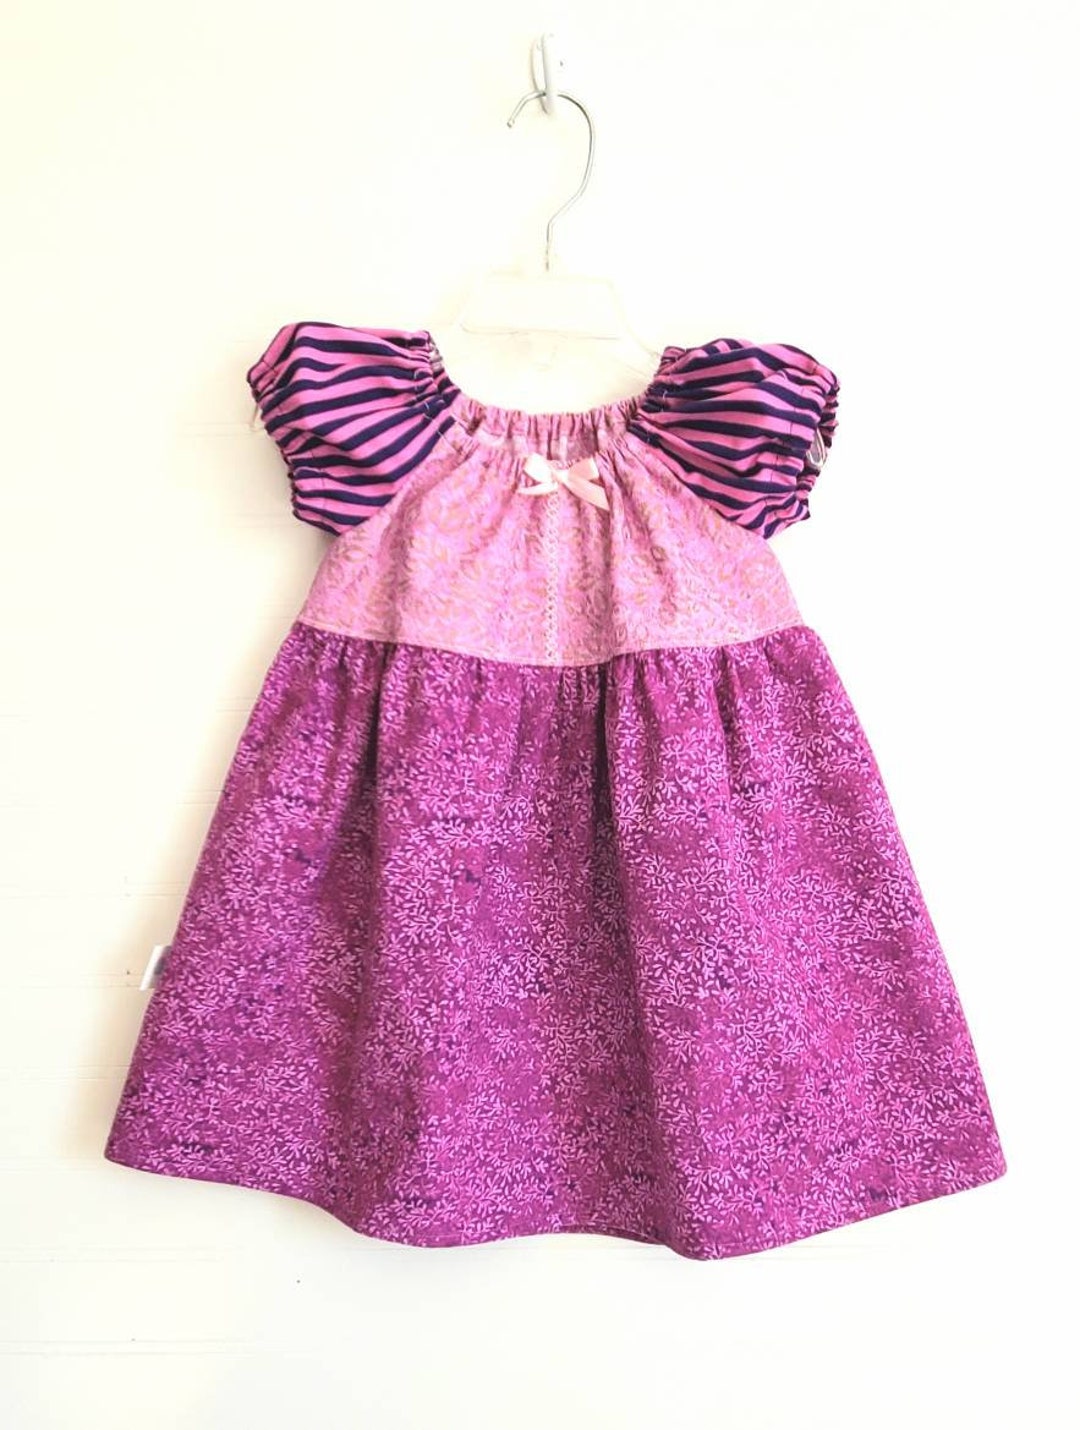 RAPUNZEL Dress TANGLED Inspired Size 12 to 18 Months Ready to - Etsy